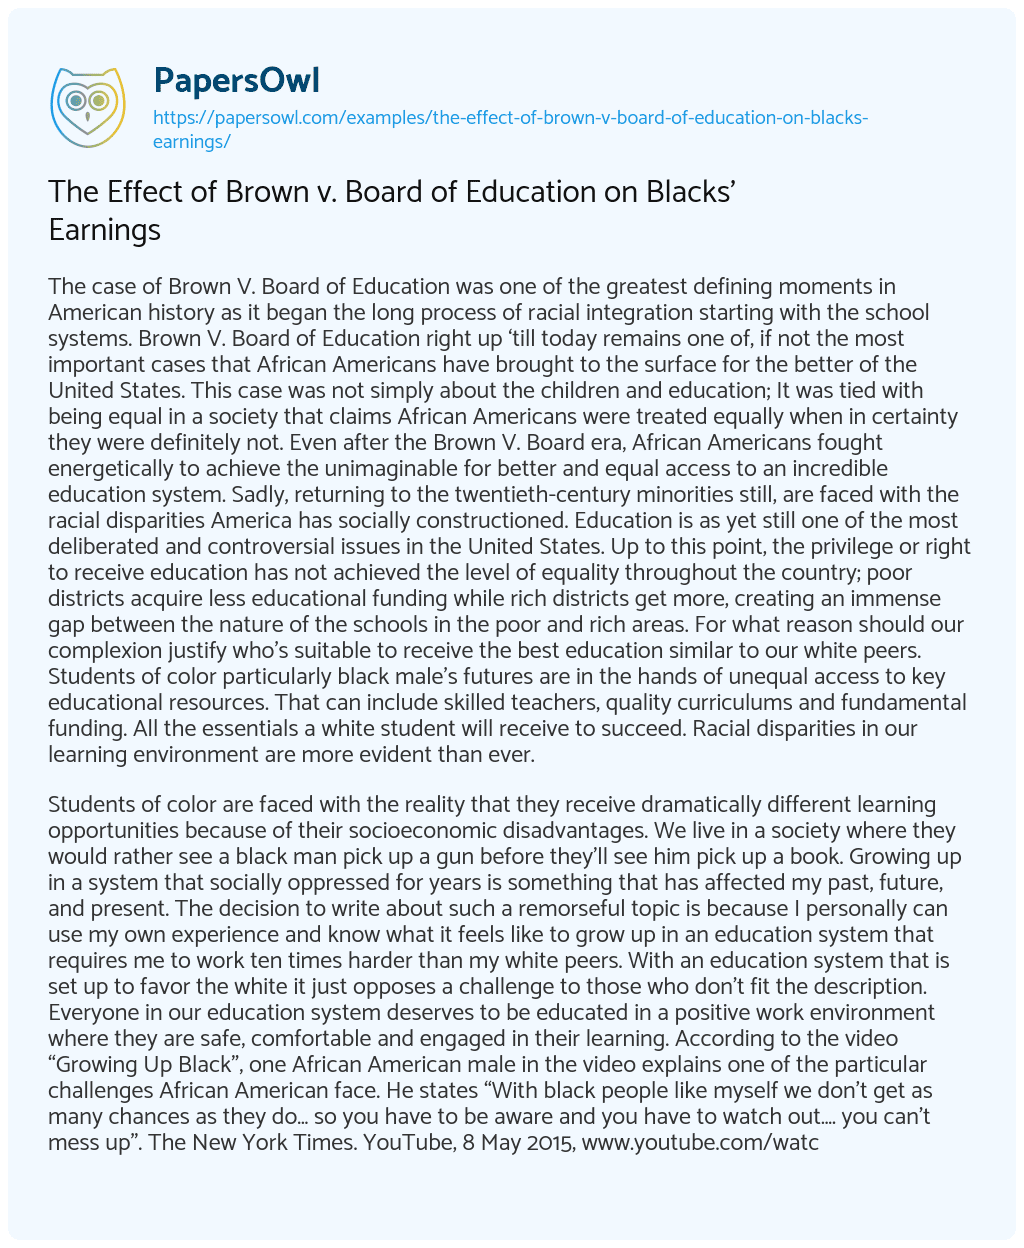 Essay on The Effect of Brown V. Board of Education on Blacks’ Earnings